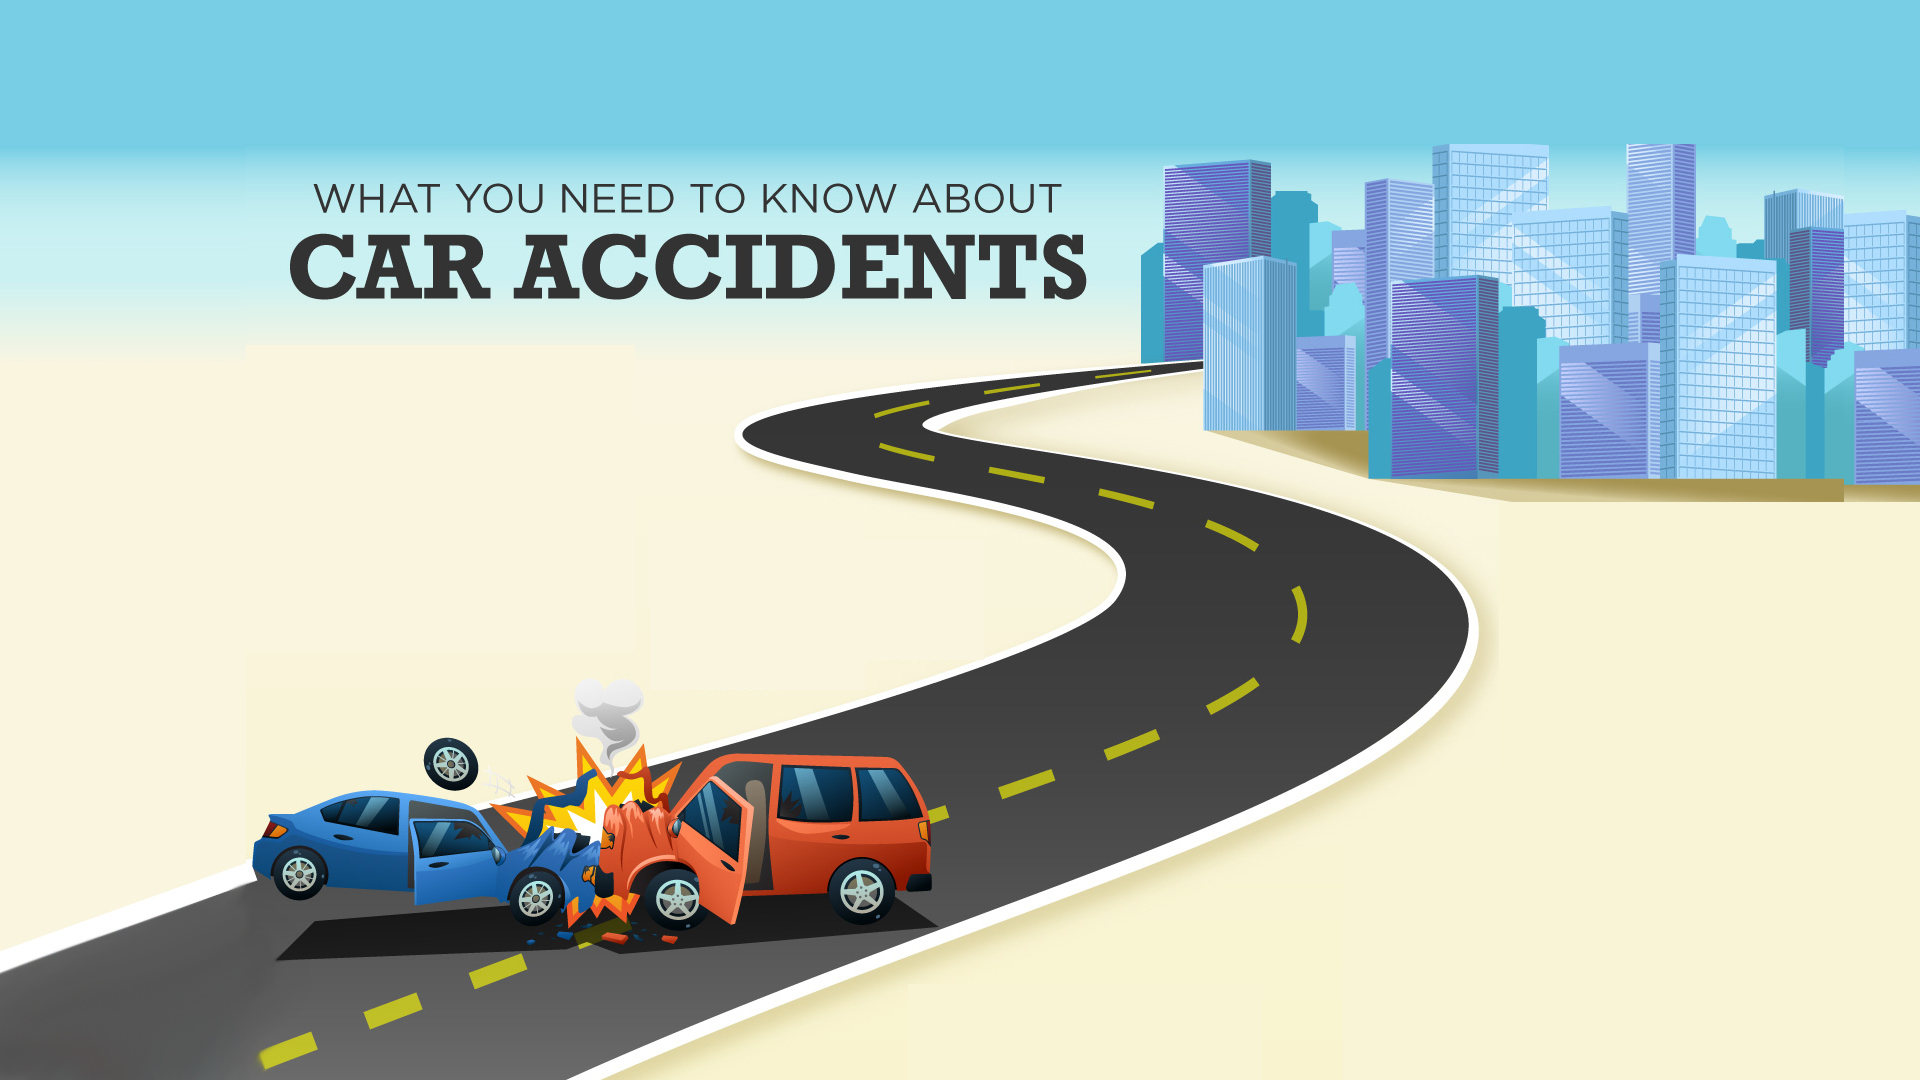 What you need to know about car accidents.